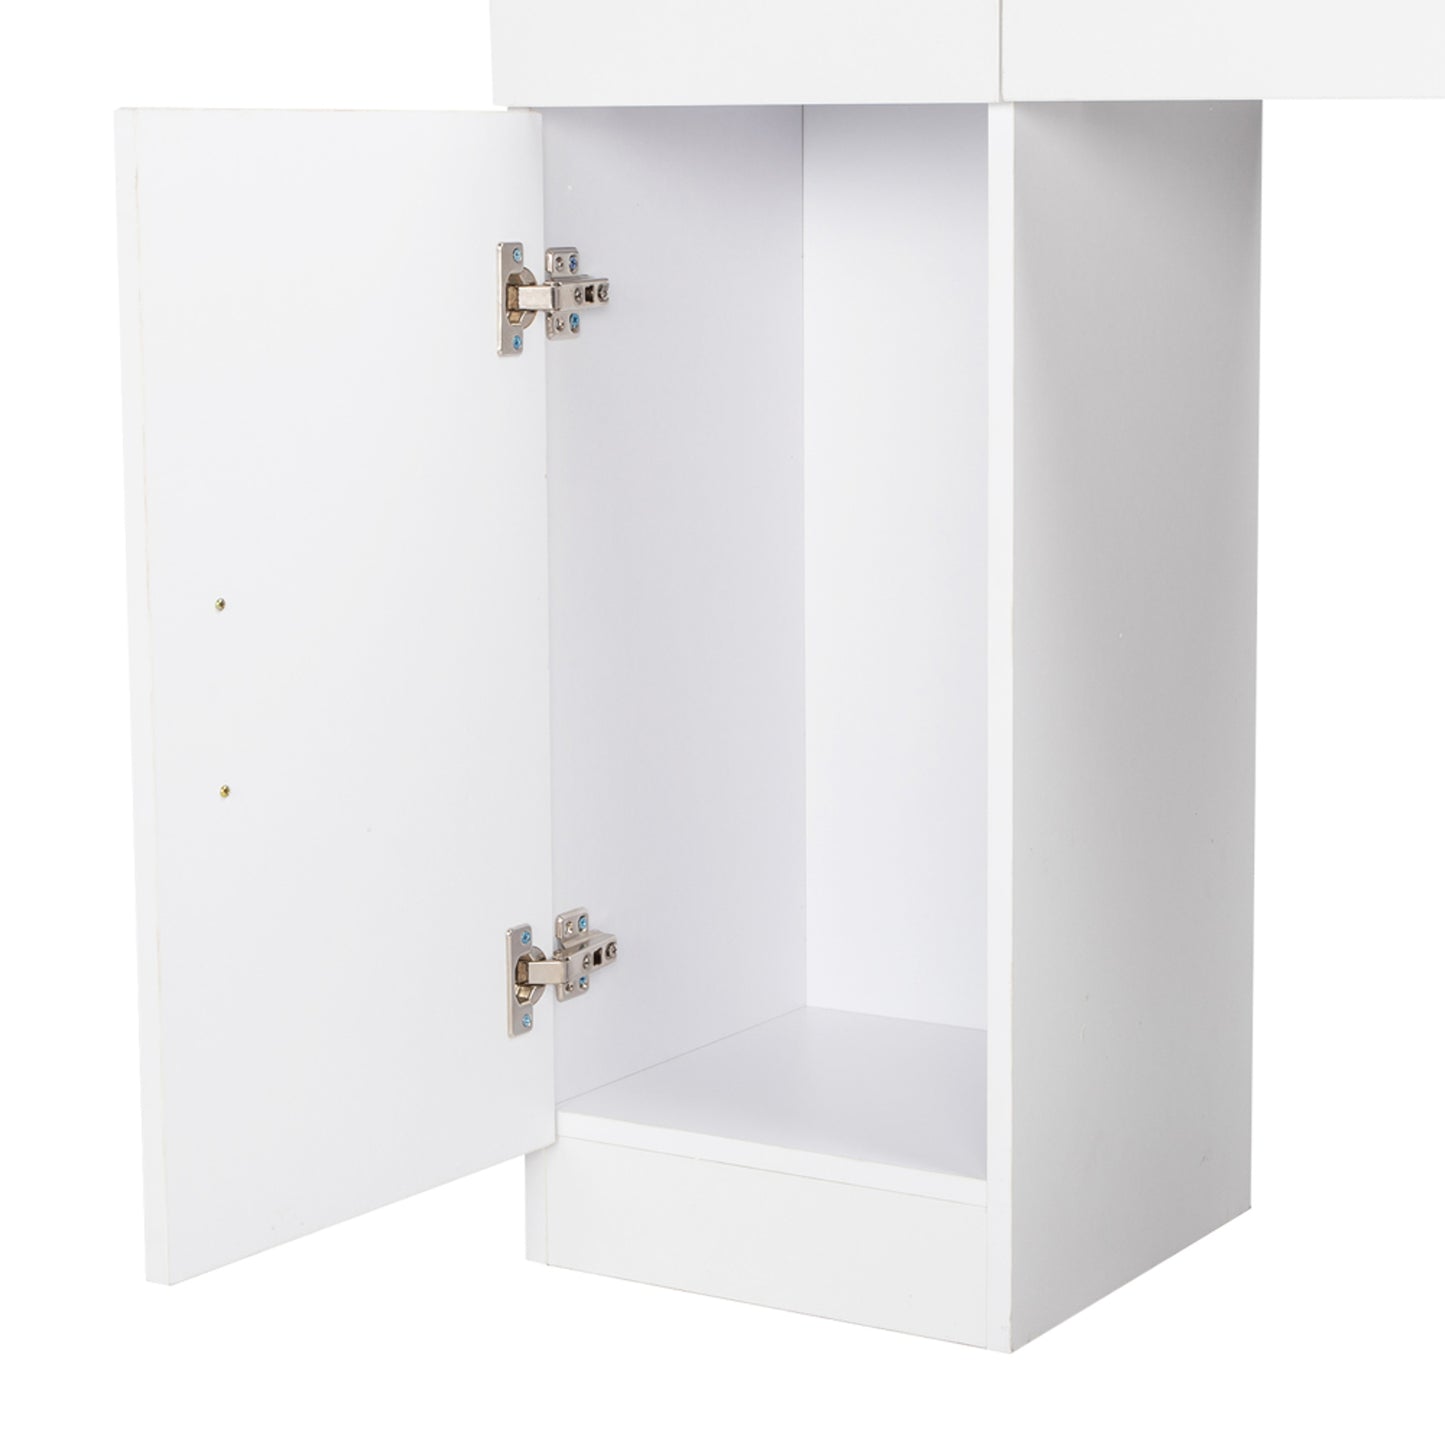 15 Cm E0 Particleboard Pitted Surface 1 Door 2 Drawers 3 Layers Rack With Legs Hairdressing Cabinet With Lock And Mirror Salon Cabinet White